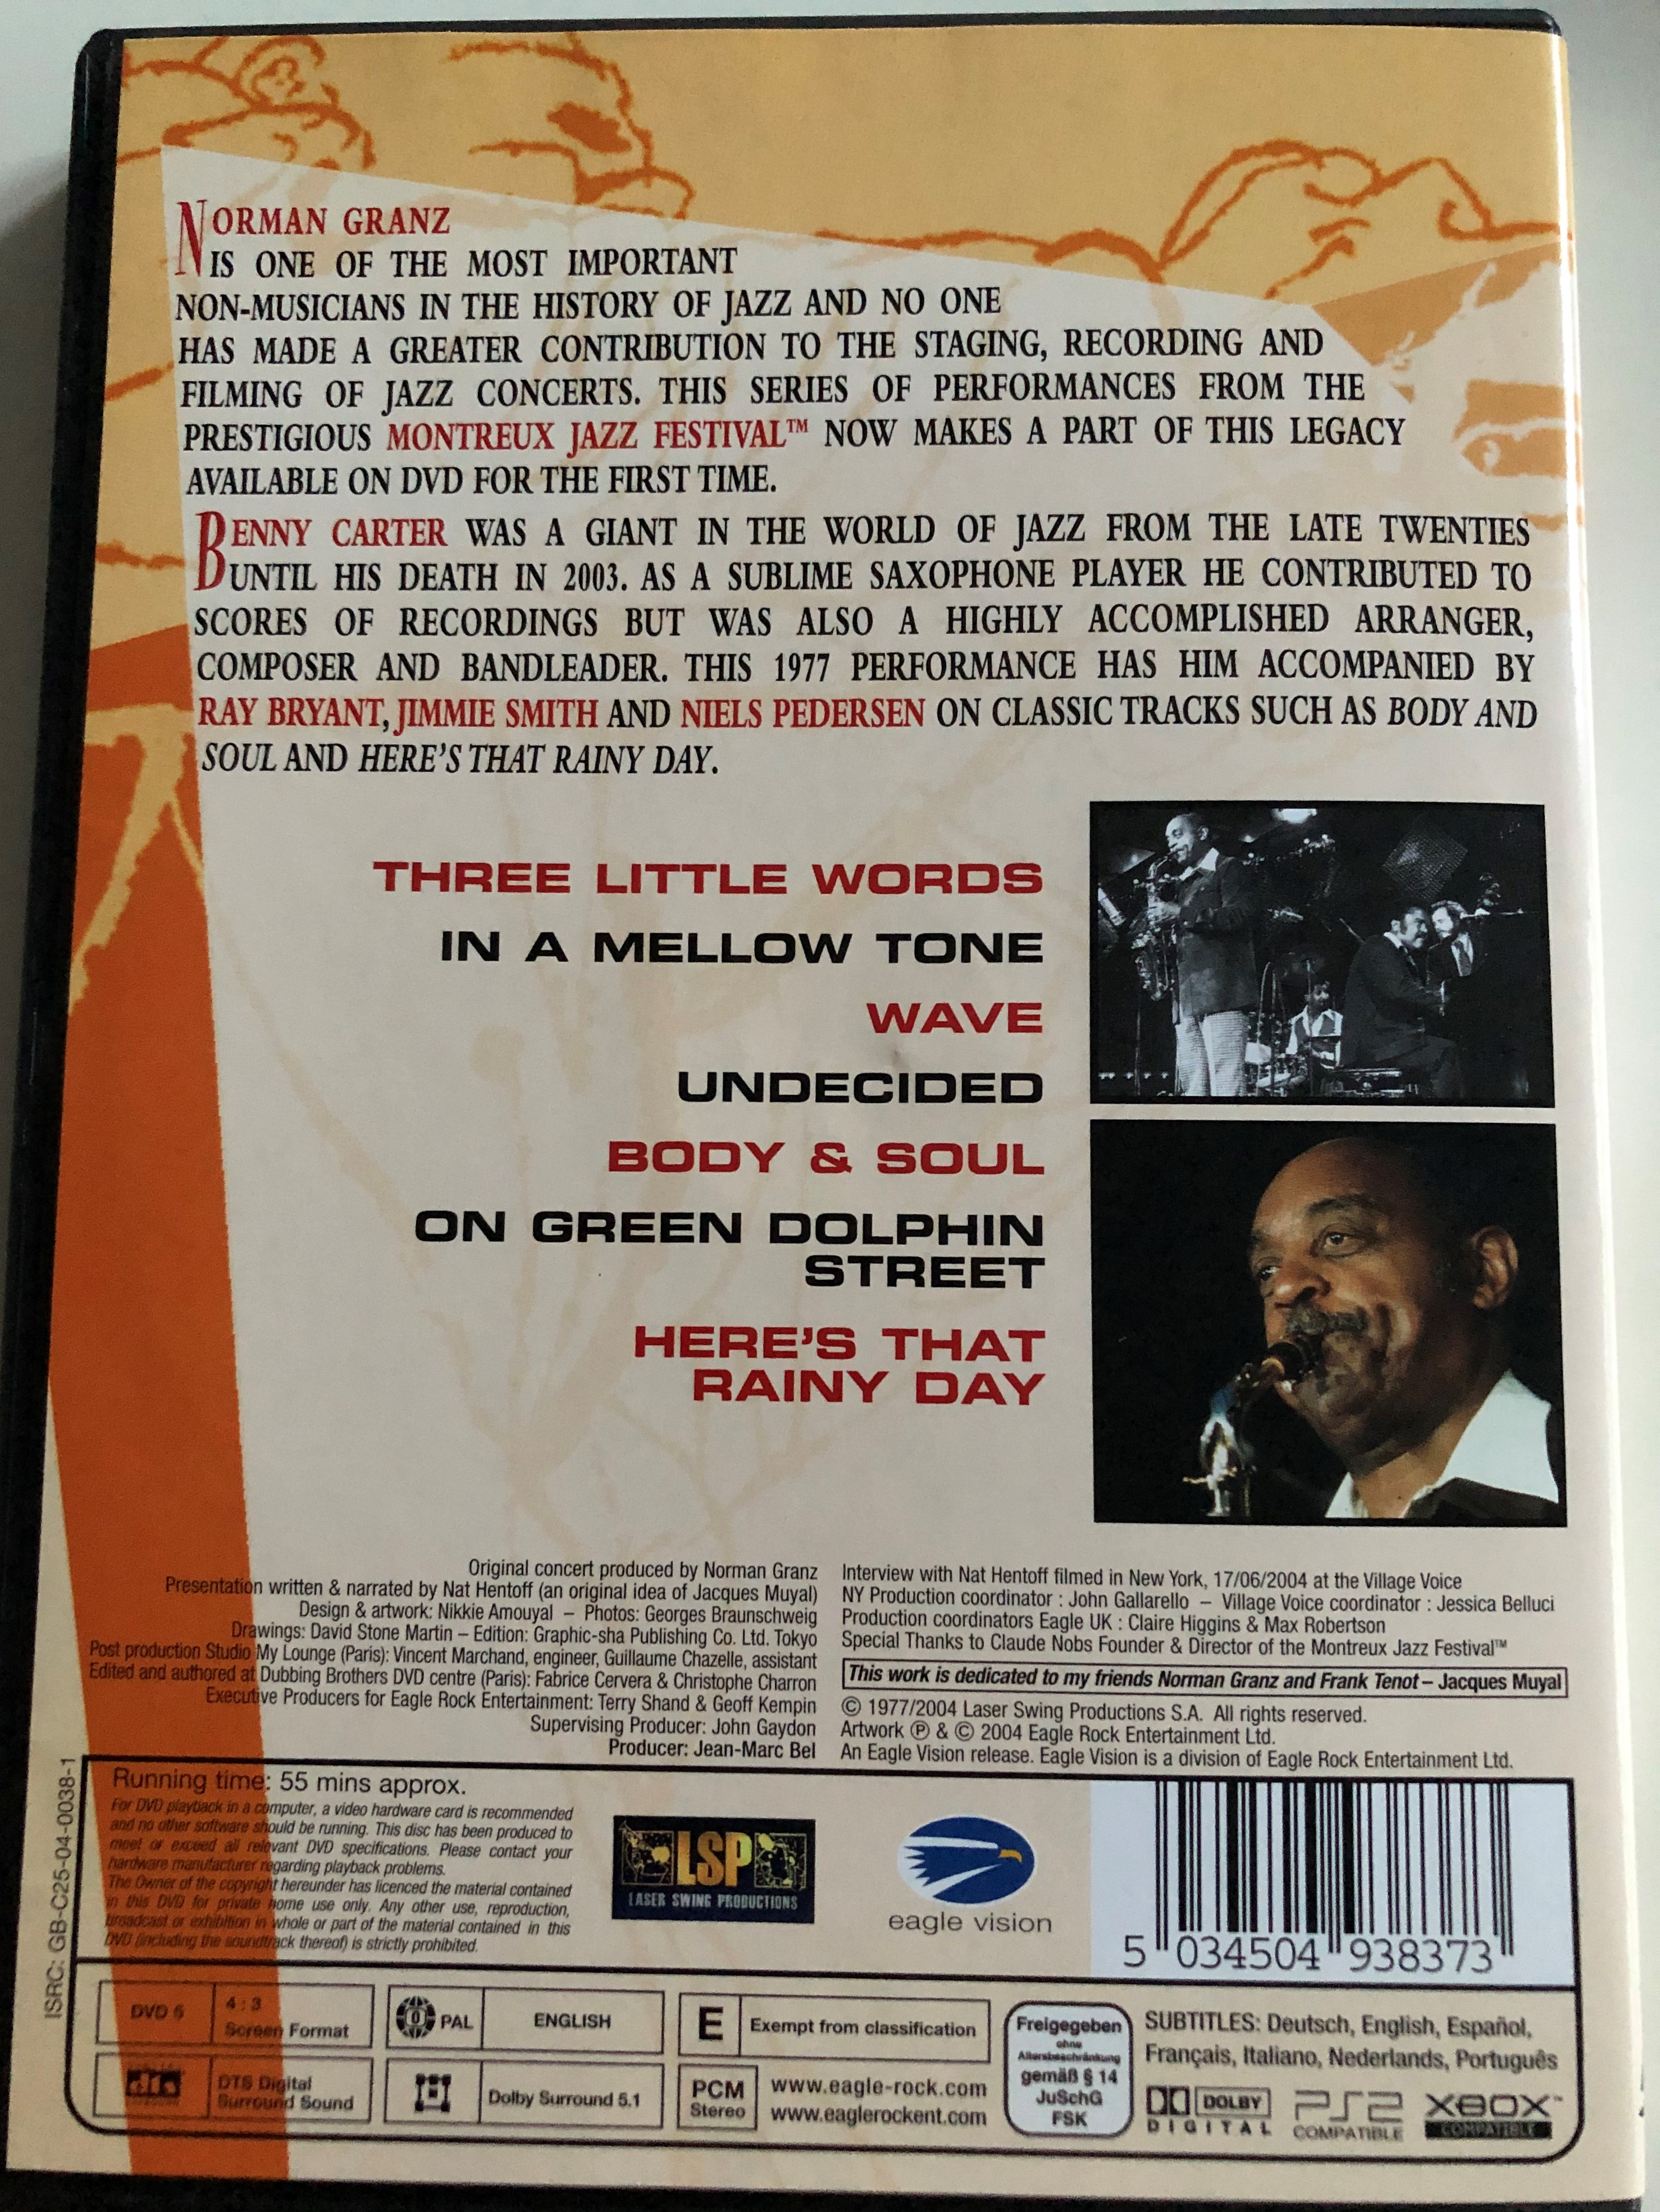 benny-carter-77-dvd-2004-norman-granz-jazz-in-montreux-three-little-words-in-a-mellow-tone-body-soul-here-s-that-rainy-day-restored-and-remastered-in-dolby-digital-5.1-dts-surround-2-.jpg